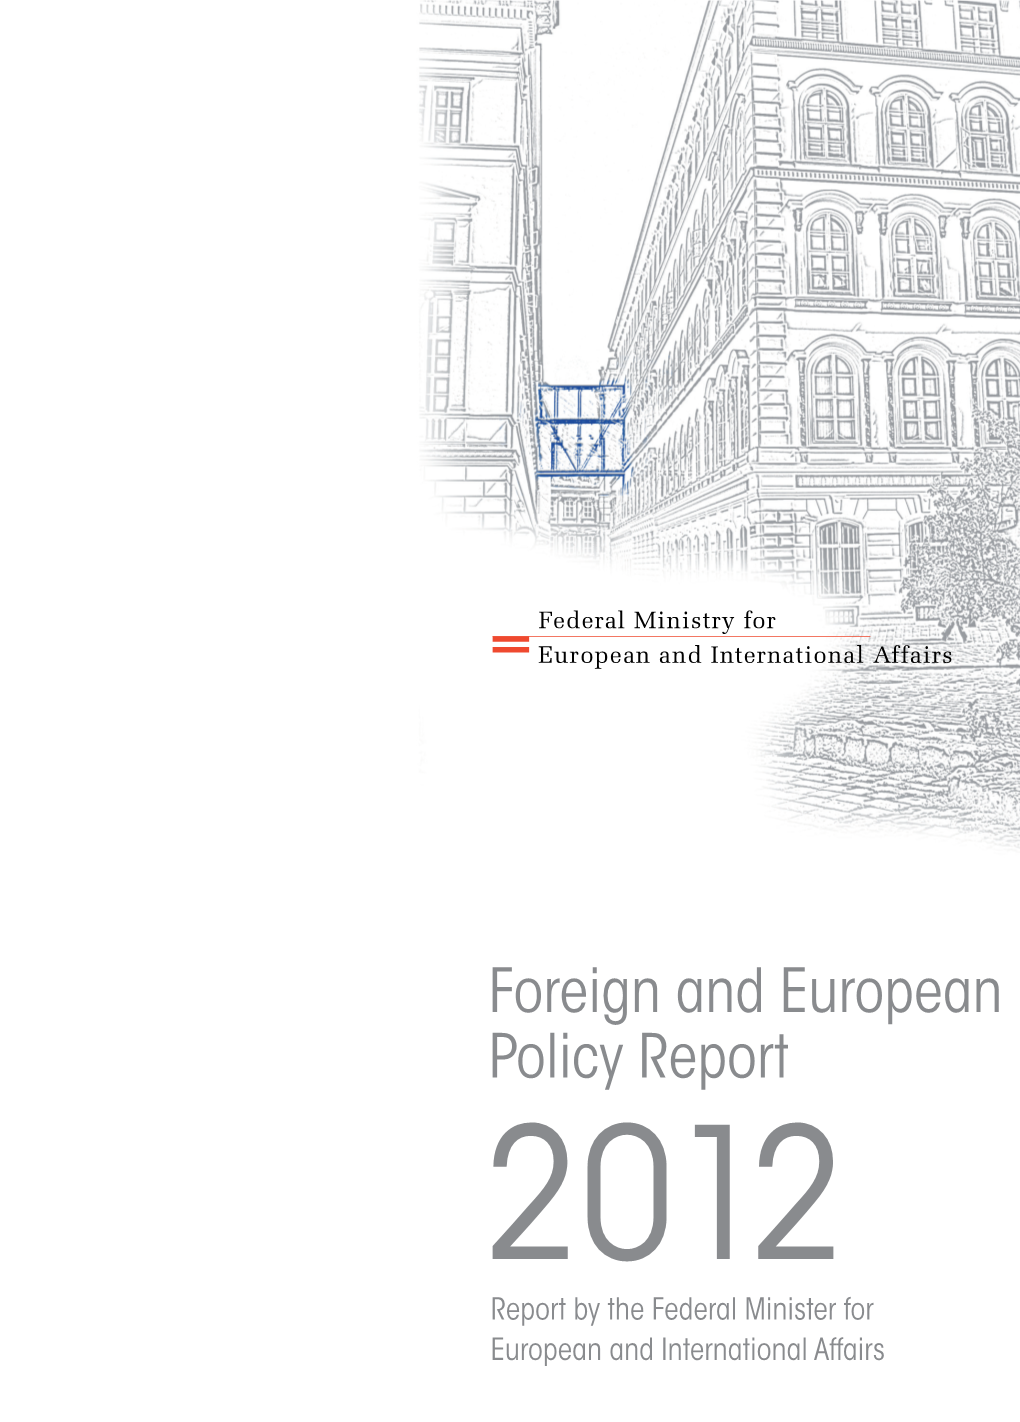 Foreign and European Policy Report 2012